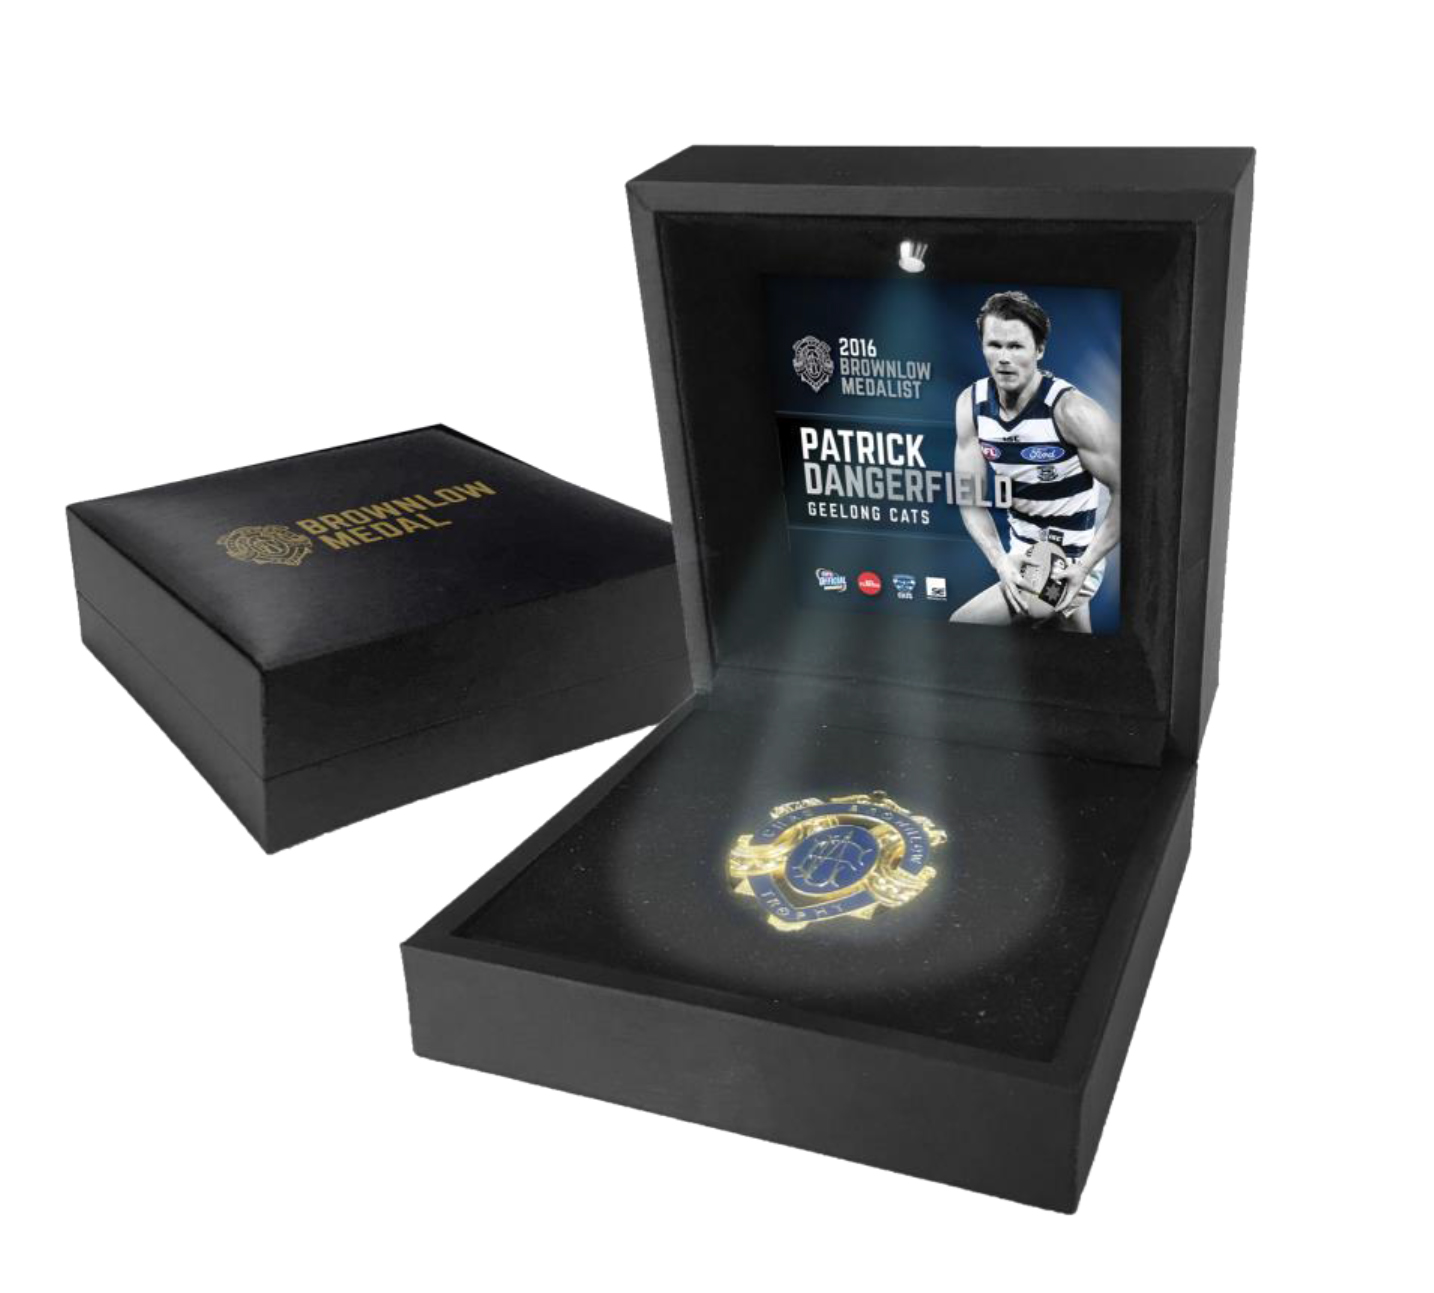 Geelong Cats – Patrick Dangerfield Boxed Limited Edition Officia...